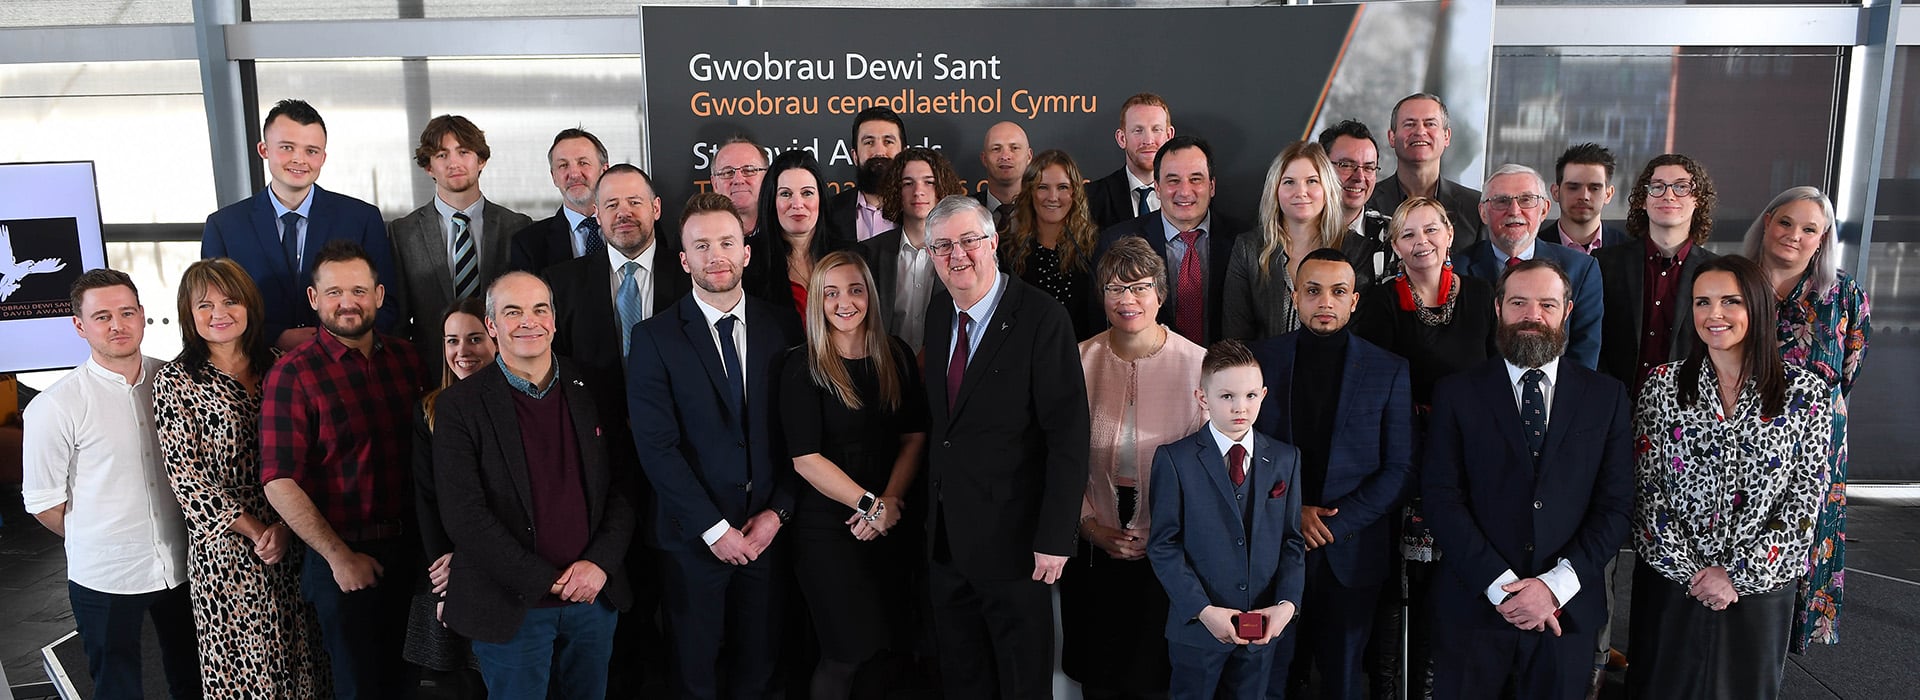 St David Awards 2020 Finalist announcement which took place in the Senedd in Cardiff Bay.Pictured here are the finalists with the First Minister© Welsh Government (Crown Copyright), all rights reserved